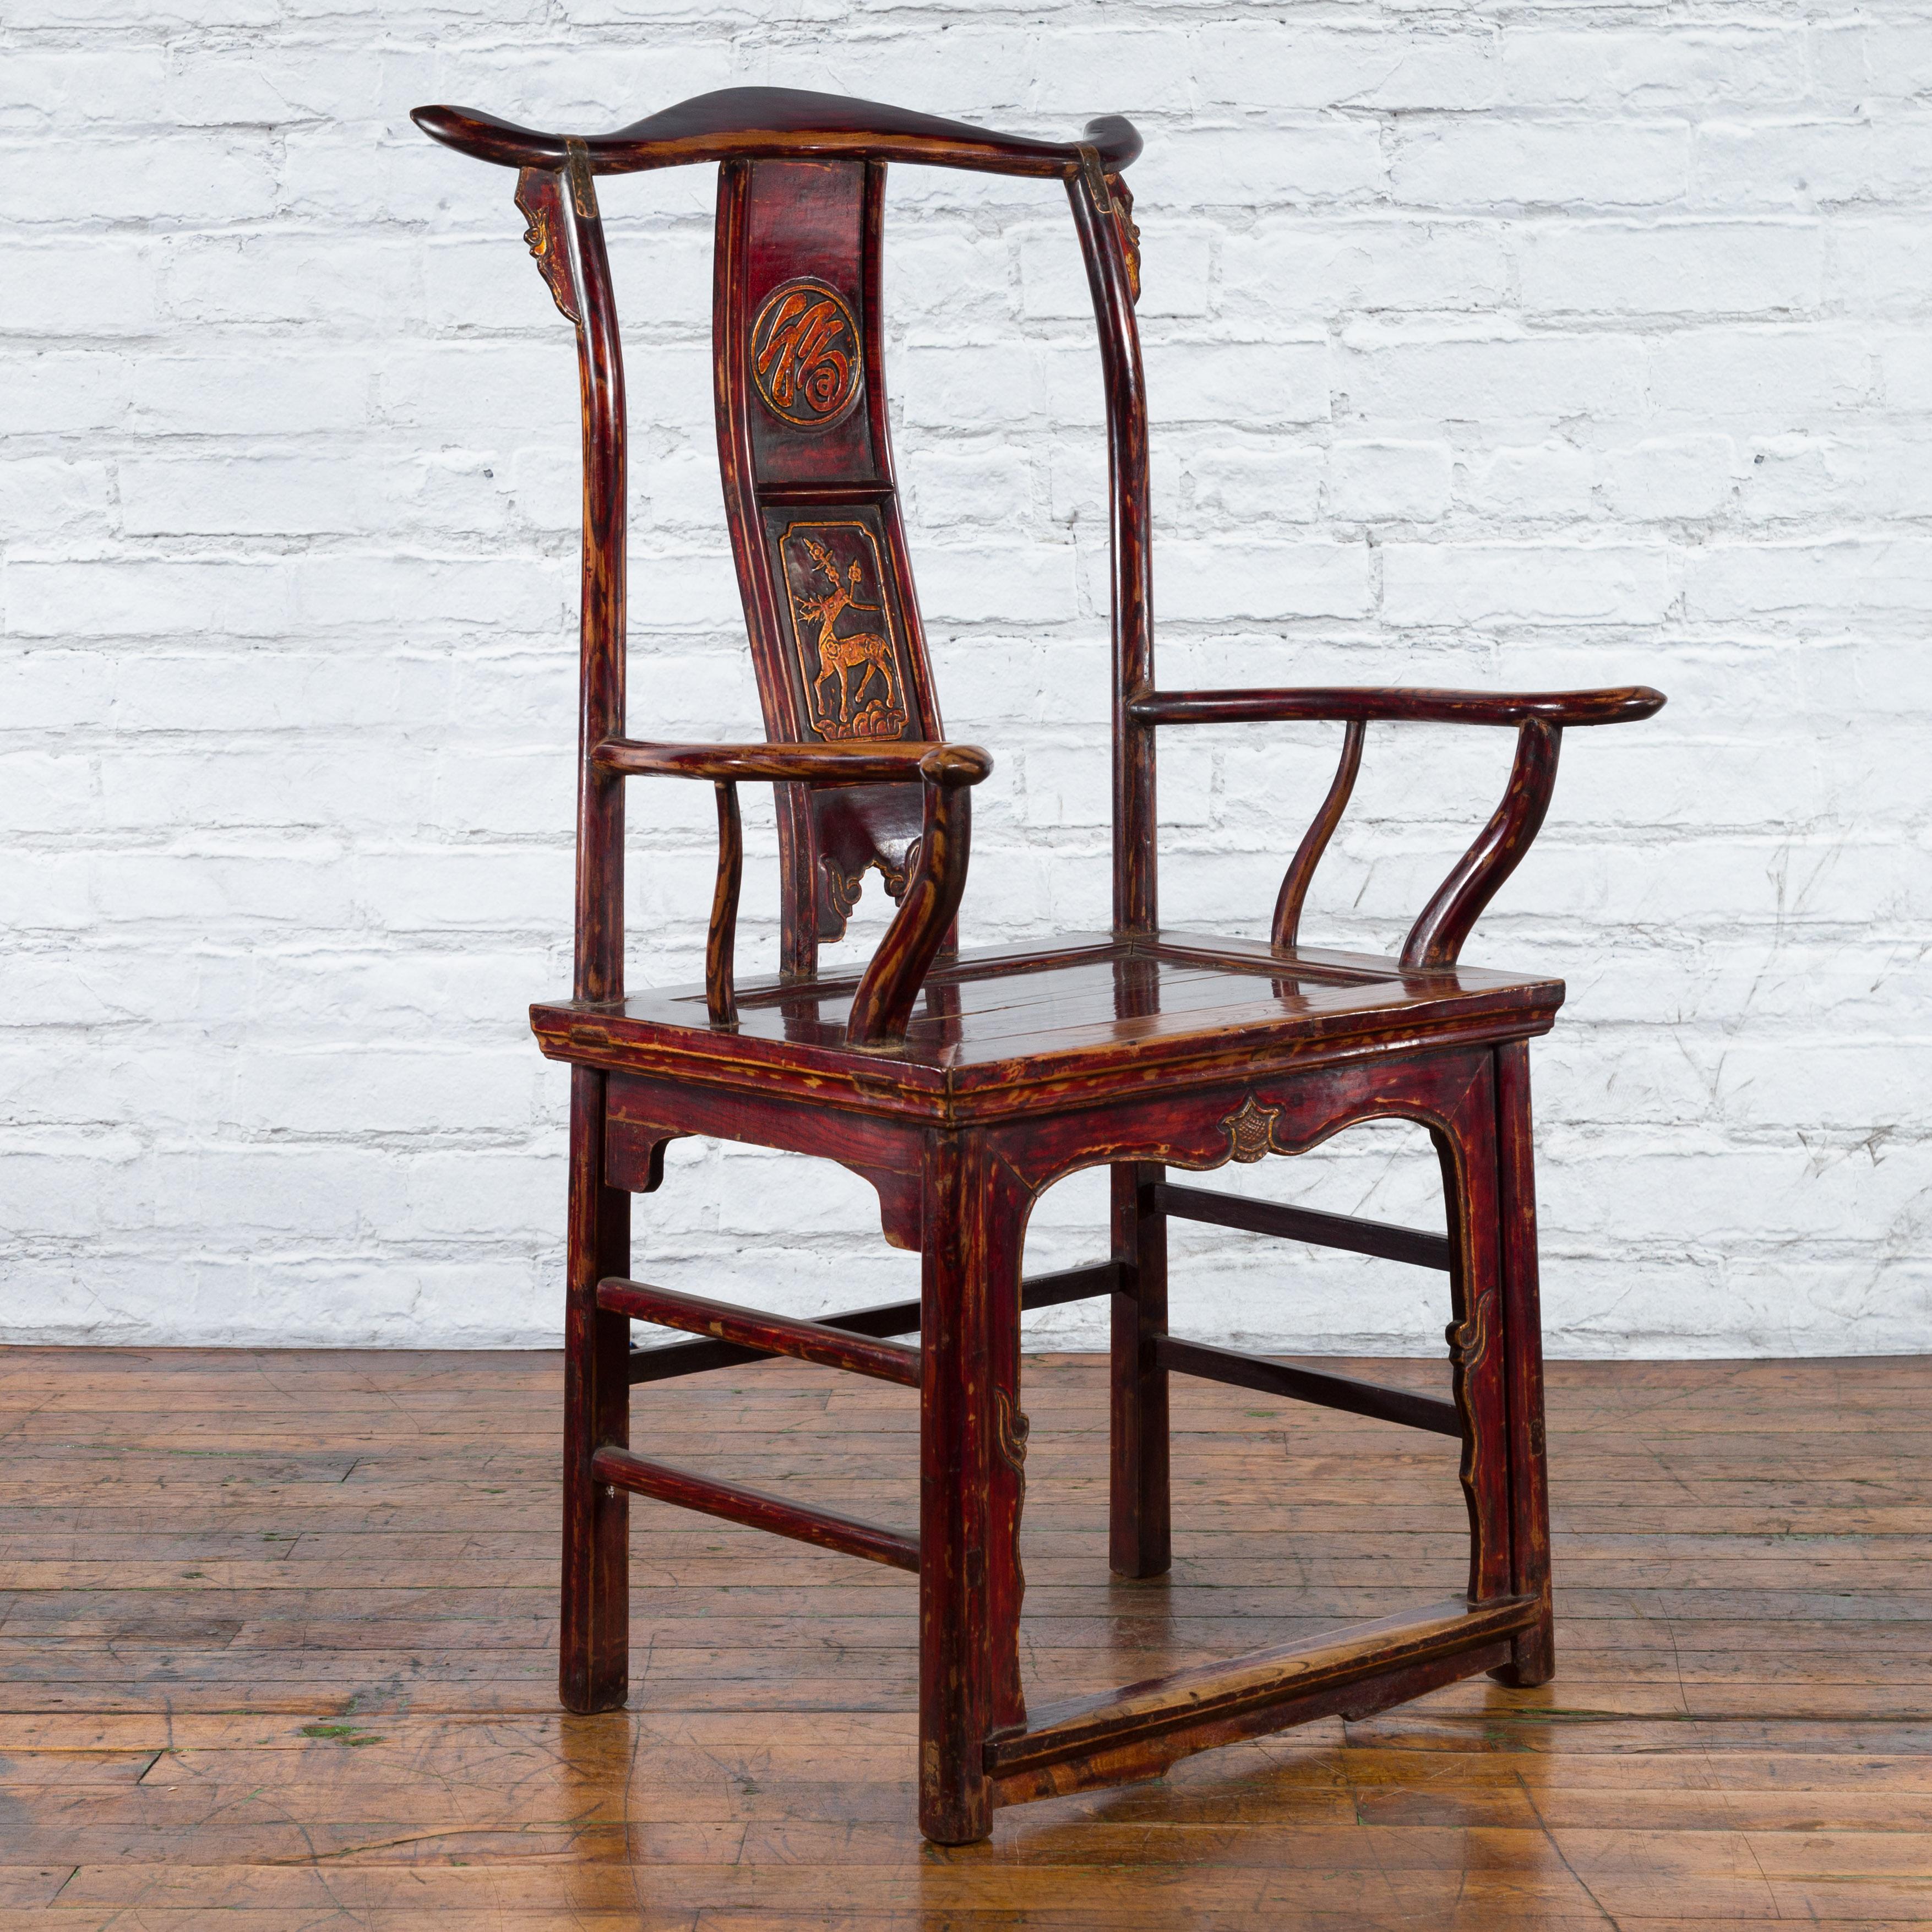 A Chinese Qing Dynasty period yoke back armchair from the 19th century with original finish and carved splat. Created in China during the Qing Dynasty, this armchair features a rectangular wooden seat with recessed panel, supporting two delicate